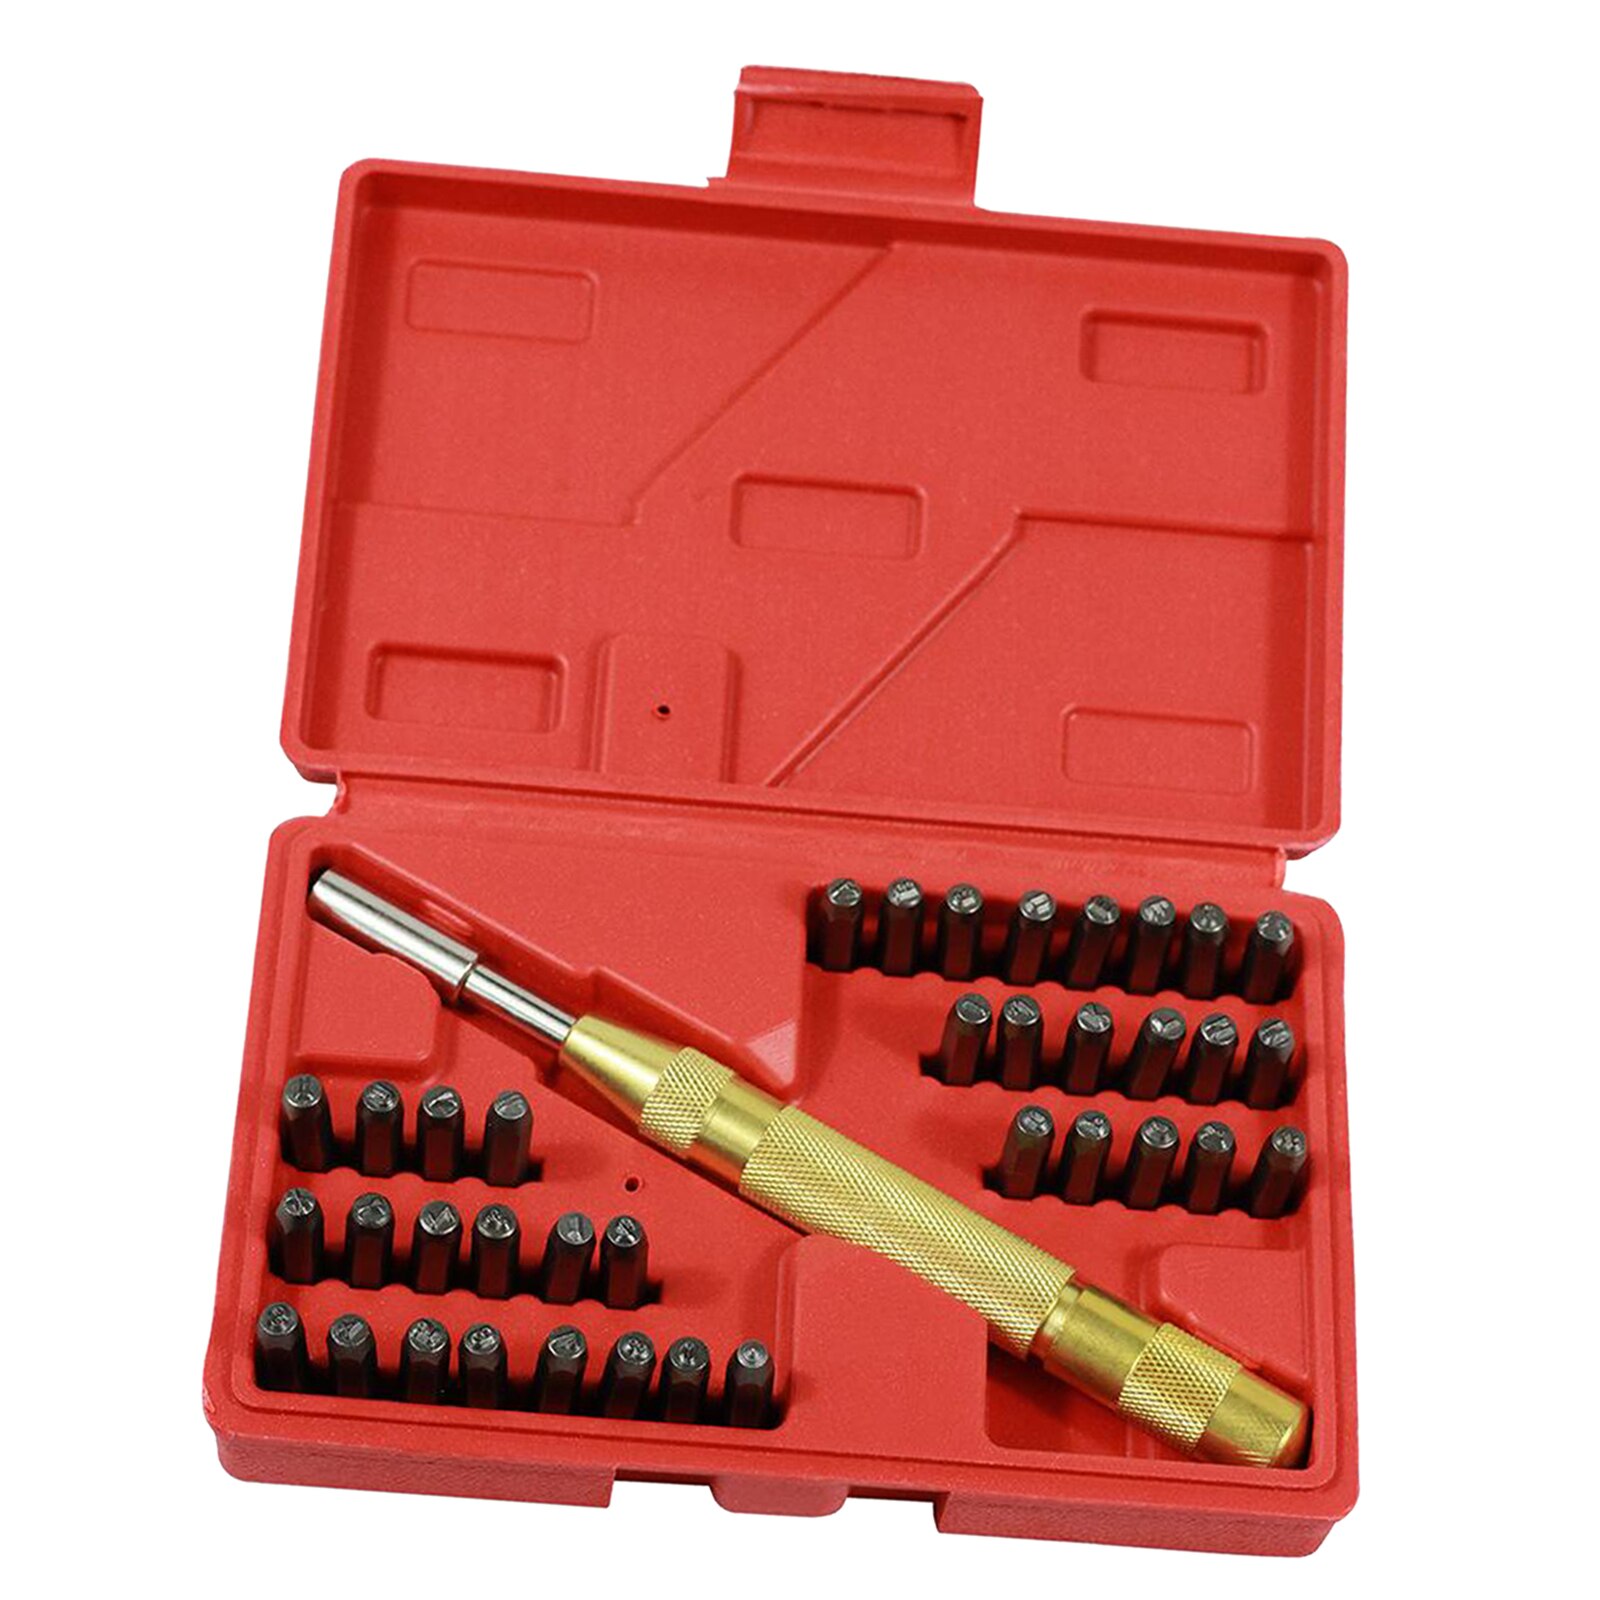 38x Multi-purpose Alloy Steel Letter and Number Stamp Automatic Letter Number Stamping Metal Punch Stamp Set Tool